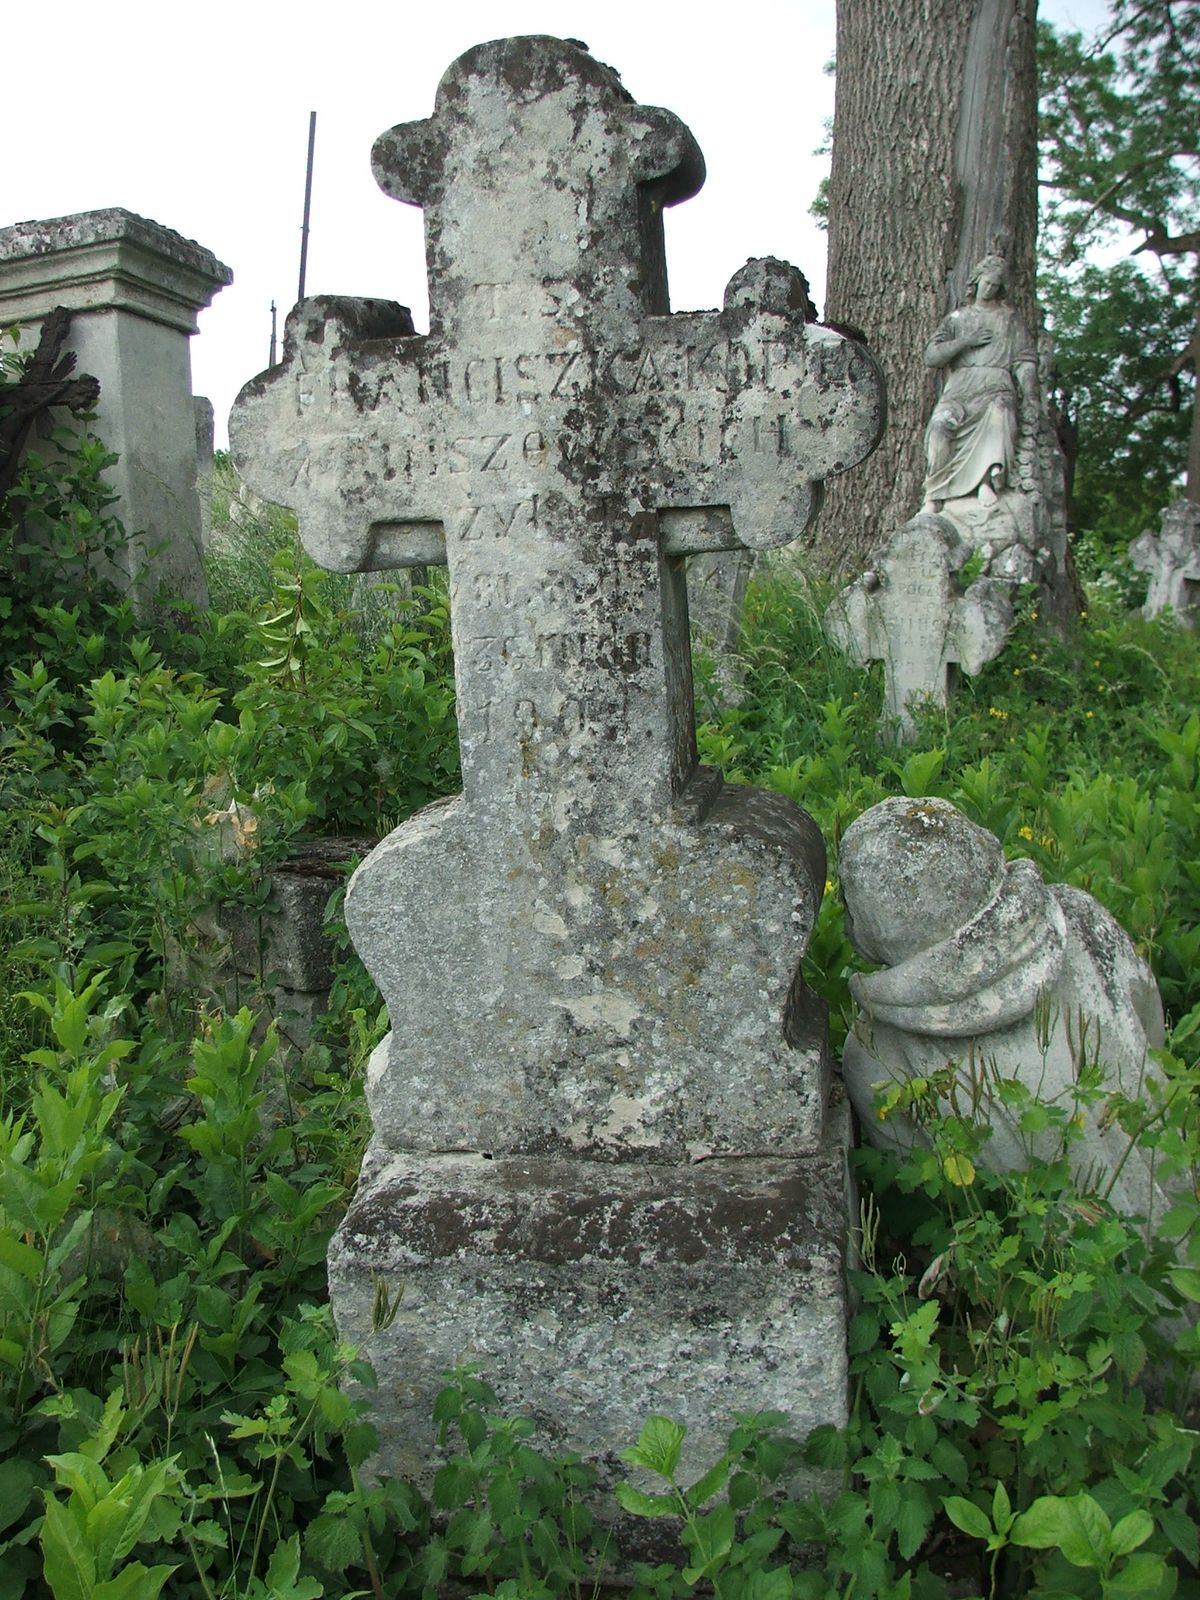 Tombstone of Franciszka Kopiec, Zbarazh cemetery, sector 02a